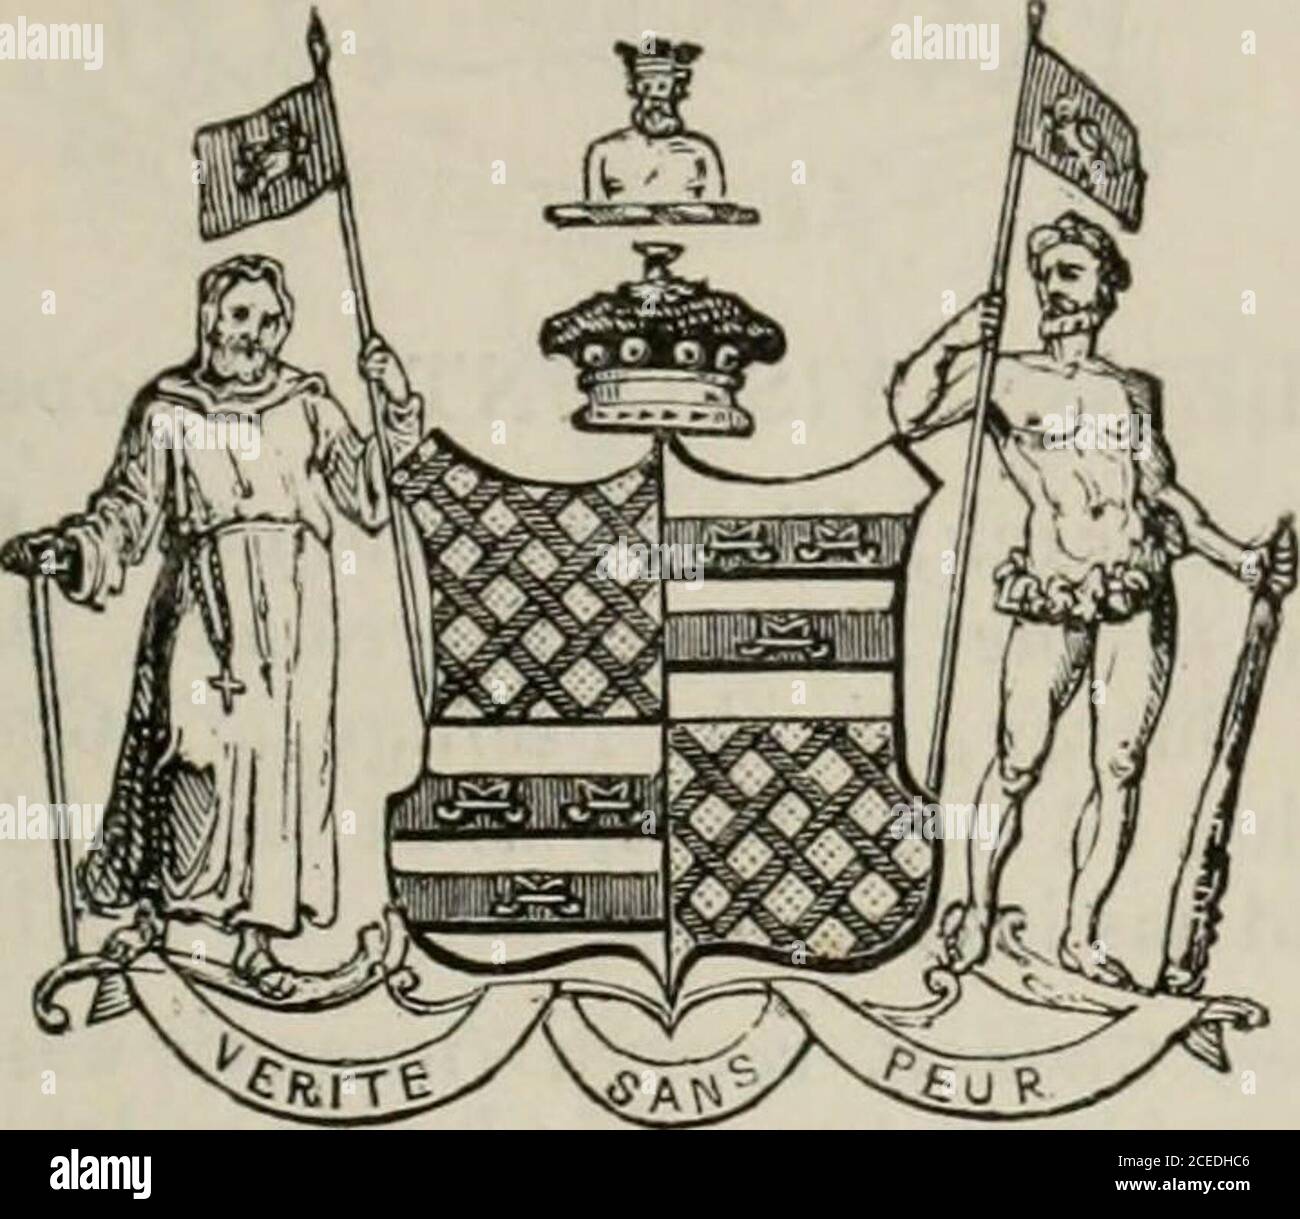 . The peerage of the British Empire as at present existing : arranged and printed from the personal communications of the nobility. 1 Philip-Hale, b. 30 May, rf. 9 Sept. 1843. 2 Alice-Mary, b. 8 March 1845. 3 George, b. -ZO April 1847. 6 Hon. Charles-Stuart, b. 24 Feb. 1816. 7 Hon. Frederick, b. 17 March 1817, ?«. 20 May 1839, Antonia, daughter of the late Rev. William Archdall, Rector of Tintern, Co. Wexford, andhas issue, I Louisa, b. 20 March 1840. 2 Philip-Alexander, 6. I April 1843. 3 Agnes Yorke, h. 10 Feb. 1845. 4 A son, b. 3 March 1847. 8 Hon. and Rev. Arthur, 6.20 Dec. 1819.374 M I D Stock Photo